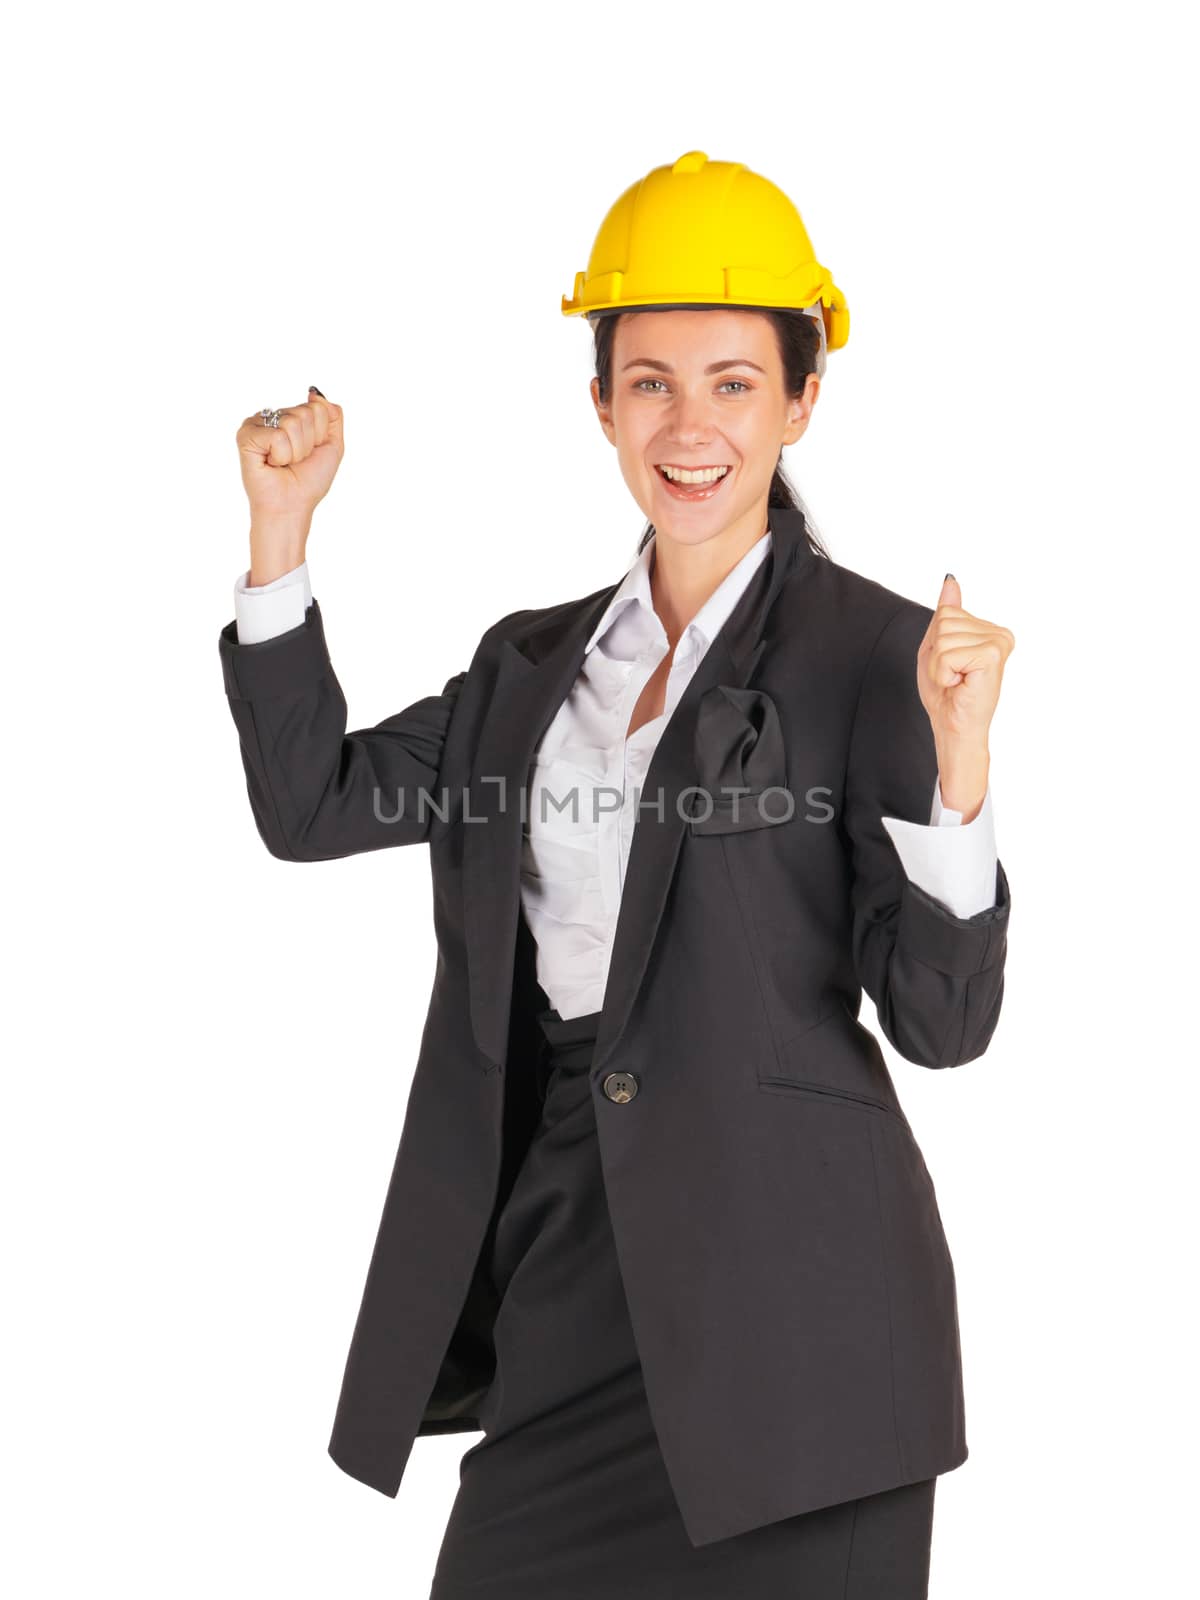 A businesswoman wearing a yellow construction helmet smile while raising her fist up. by chadchai_k